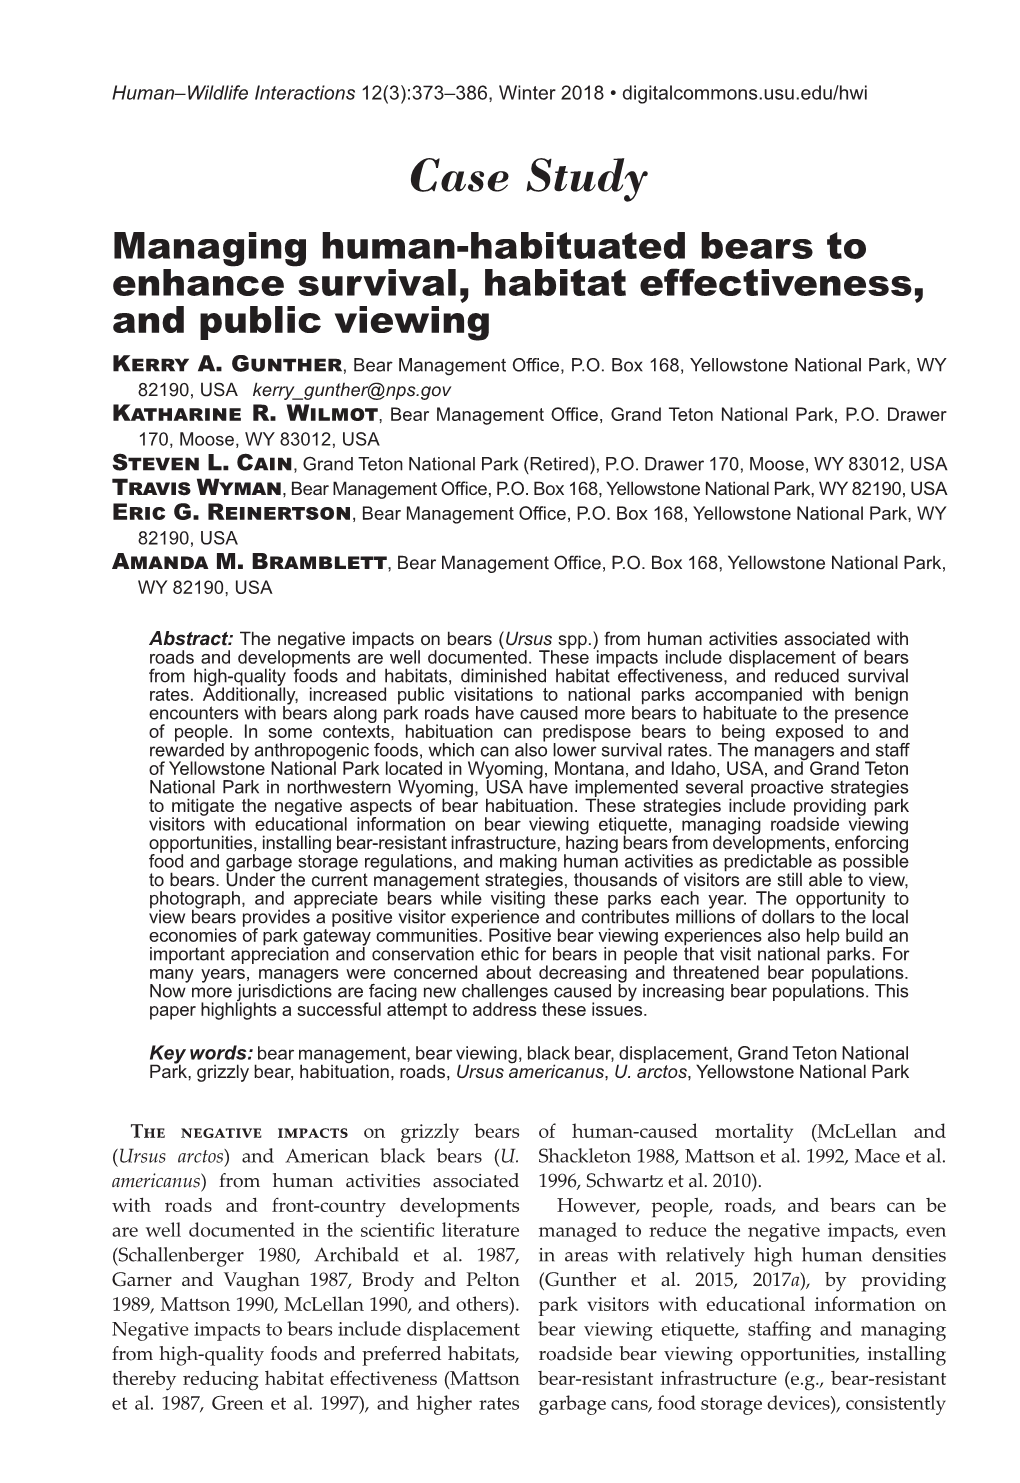 Managing Human-Habituated Bears to Enhance Survival, Habitat Effectiveness, and Public Viewing Kerry A